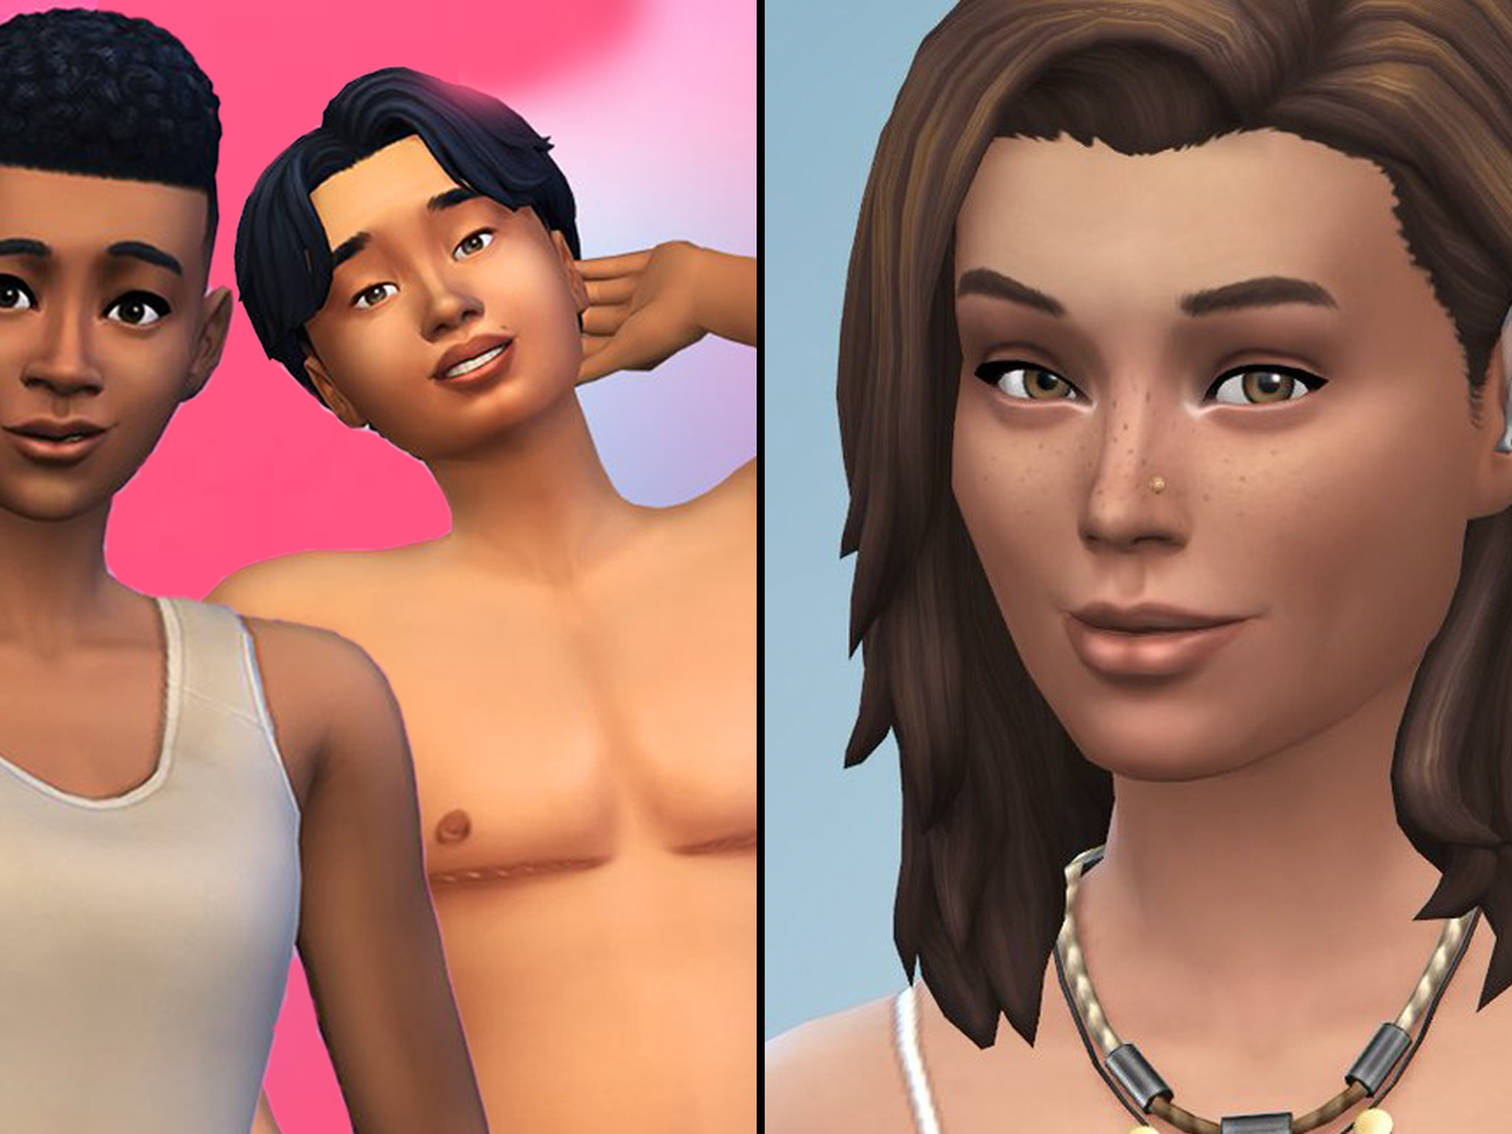 The Sims 4 adds binders and top surgery scars in inclusive Create-A-Sim  update - PopBuzz